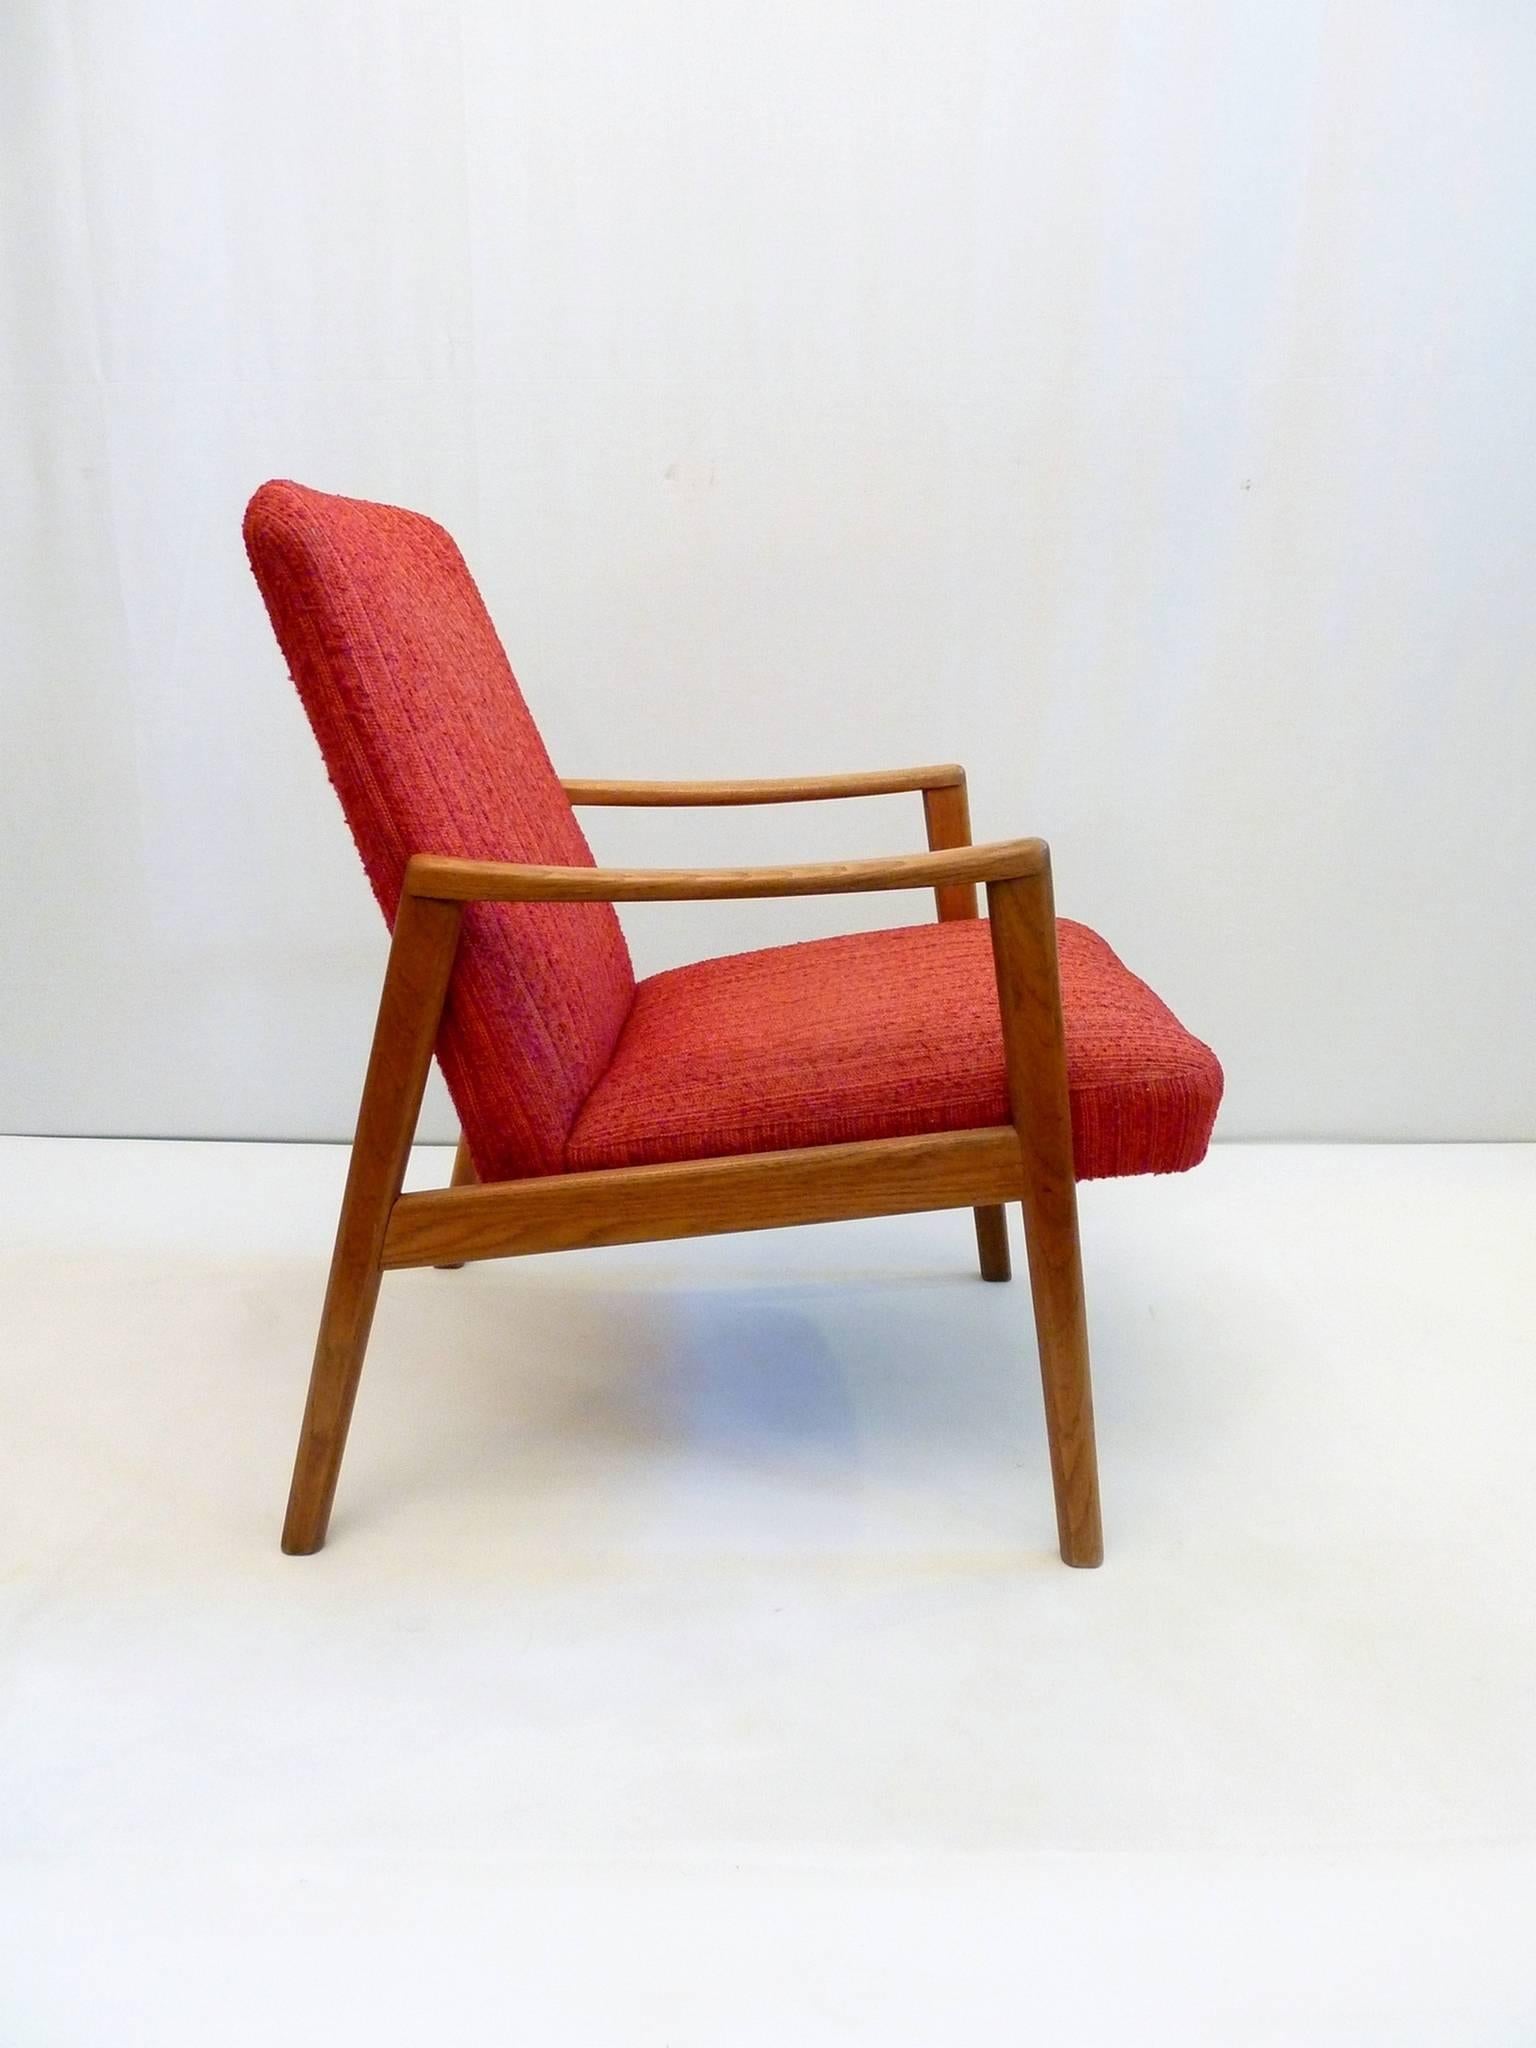 Midcentury Swedish Oak and Wool Easychairs In Excellent Condition For Sale In Albano Laziale, Rome/Lazio